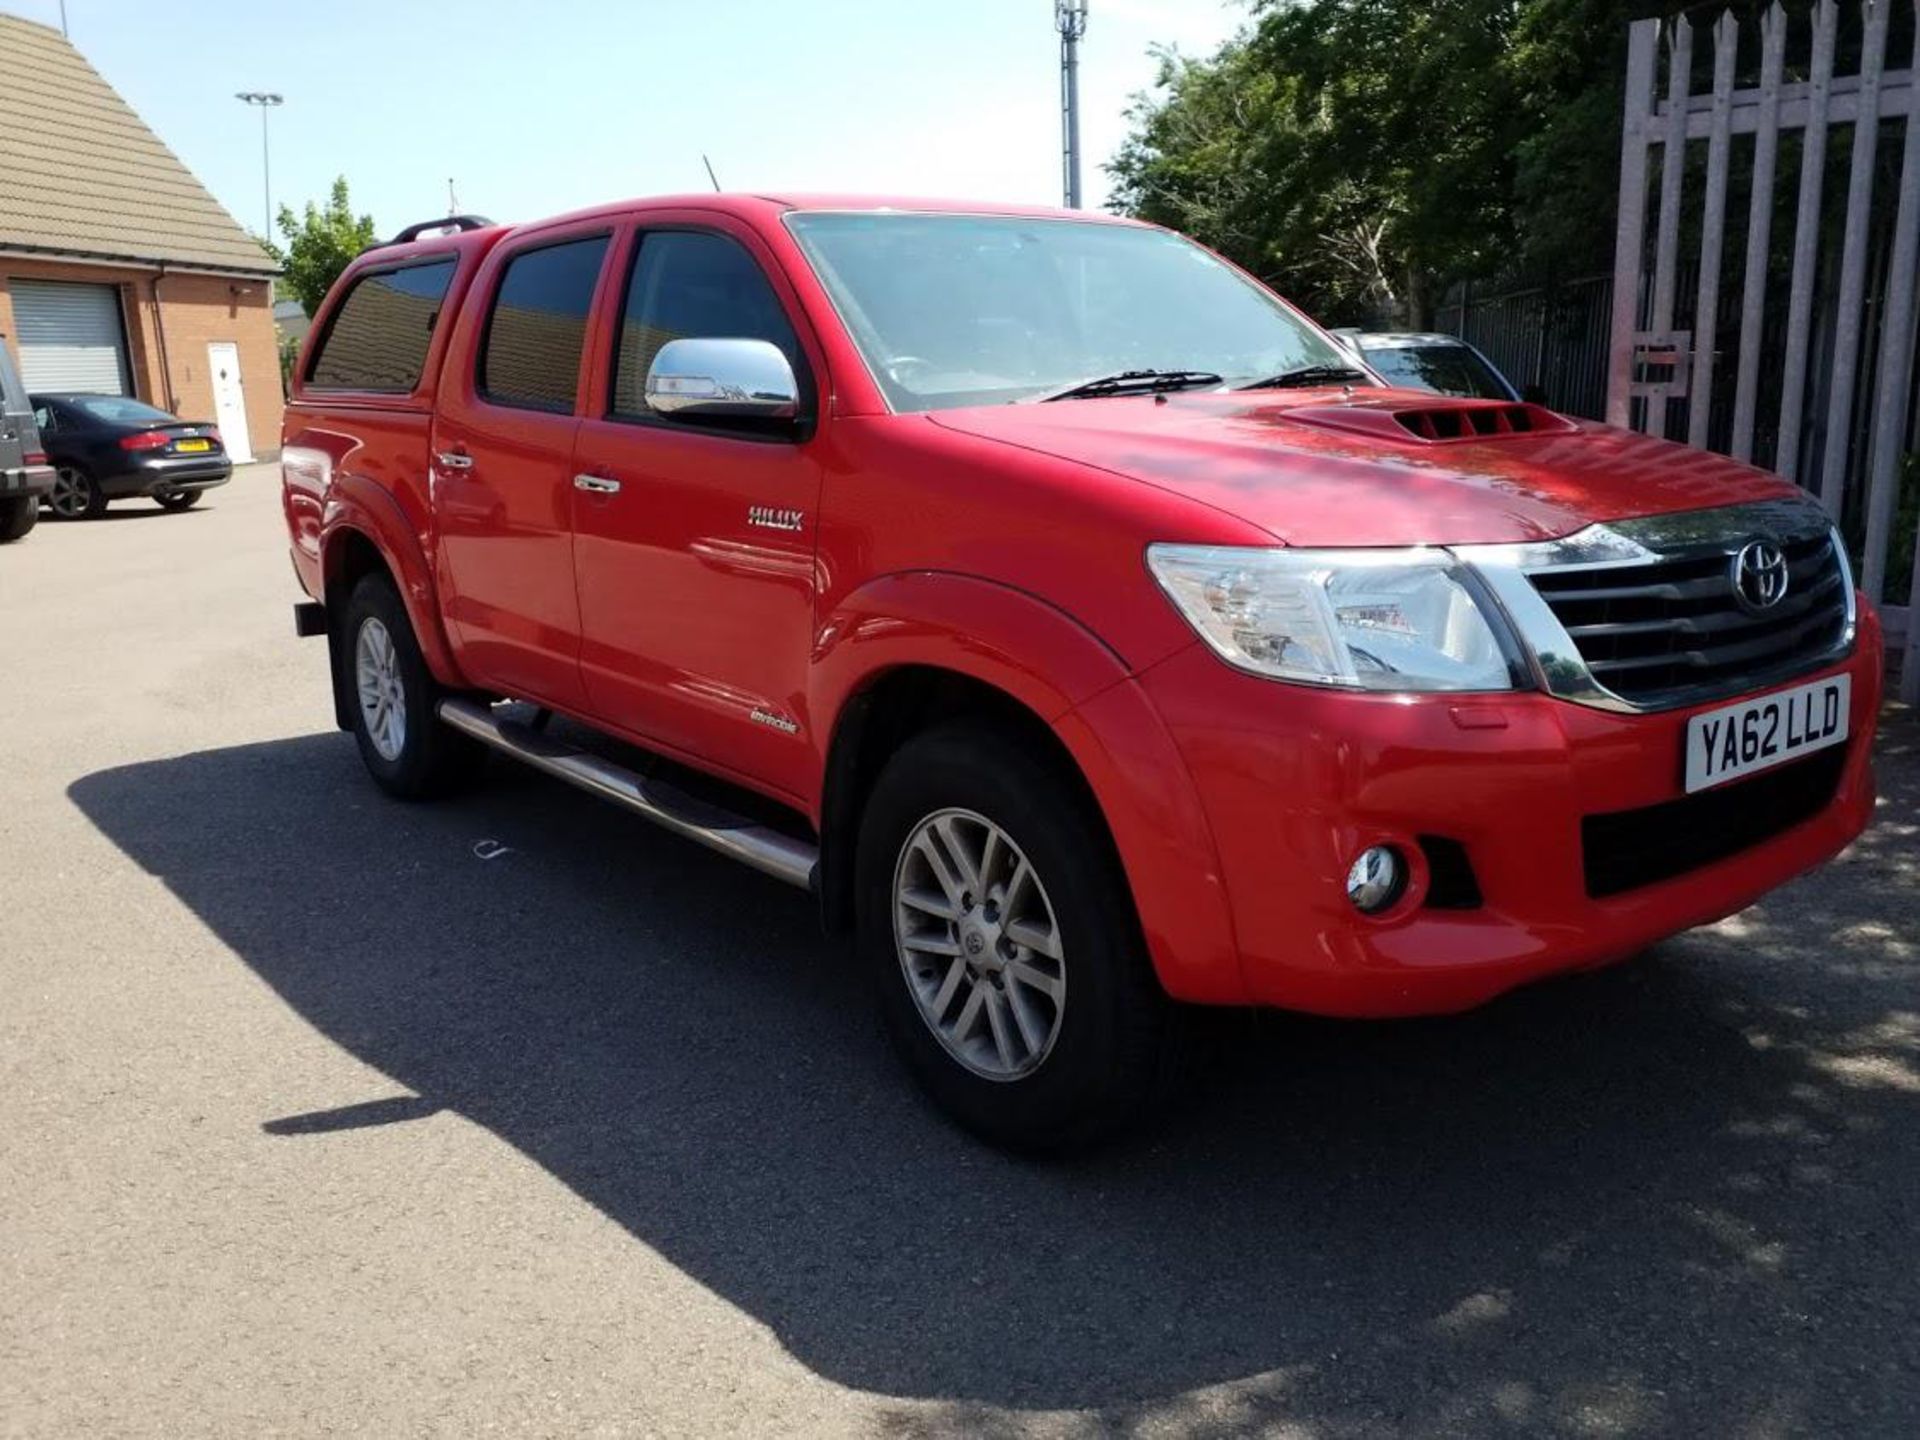 2013/62 REG TOYOTA HILUX INVINCIBLE D-4D 4X4 RED 3.0 AUTO, SHOWING 0 FORMER KEEPERS *PLUS VAT*